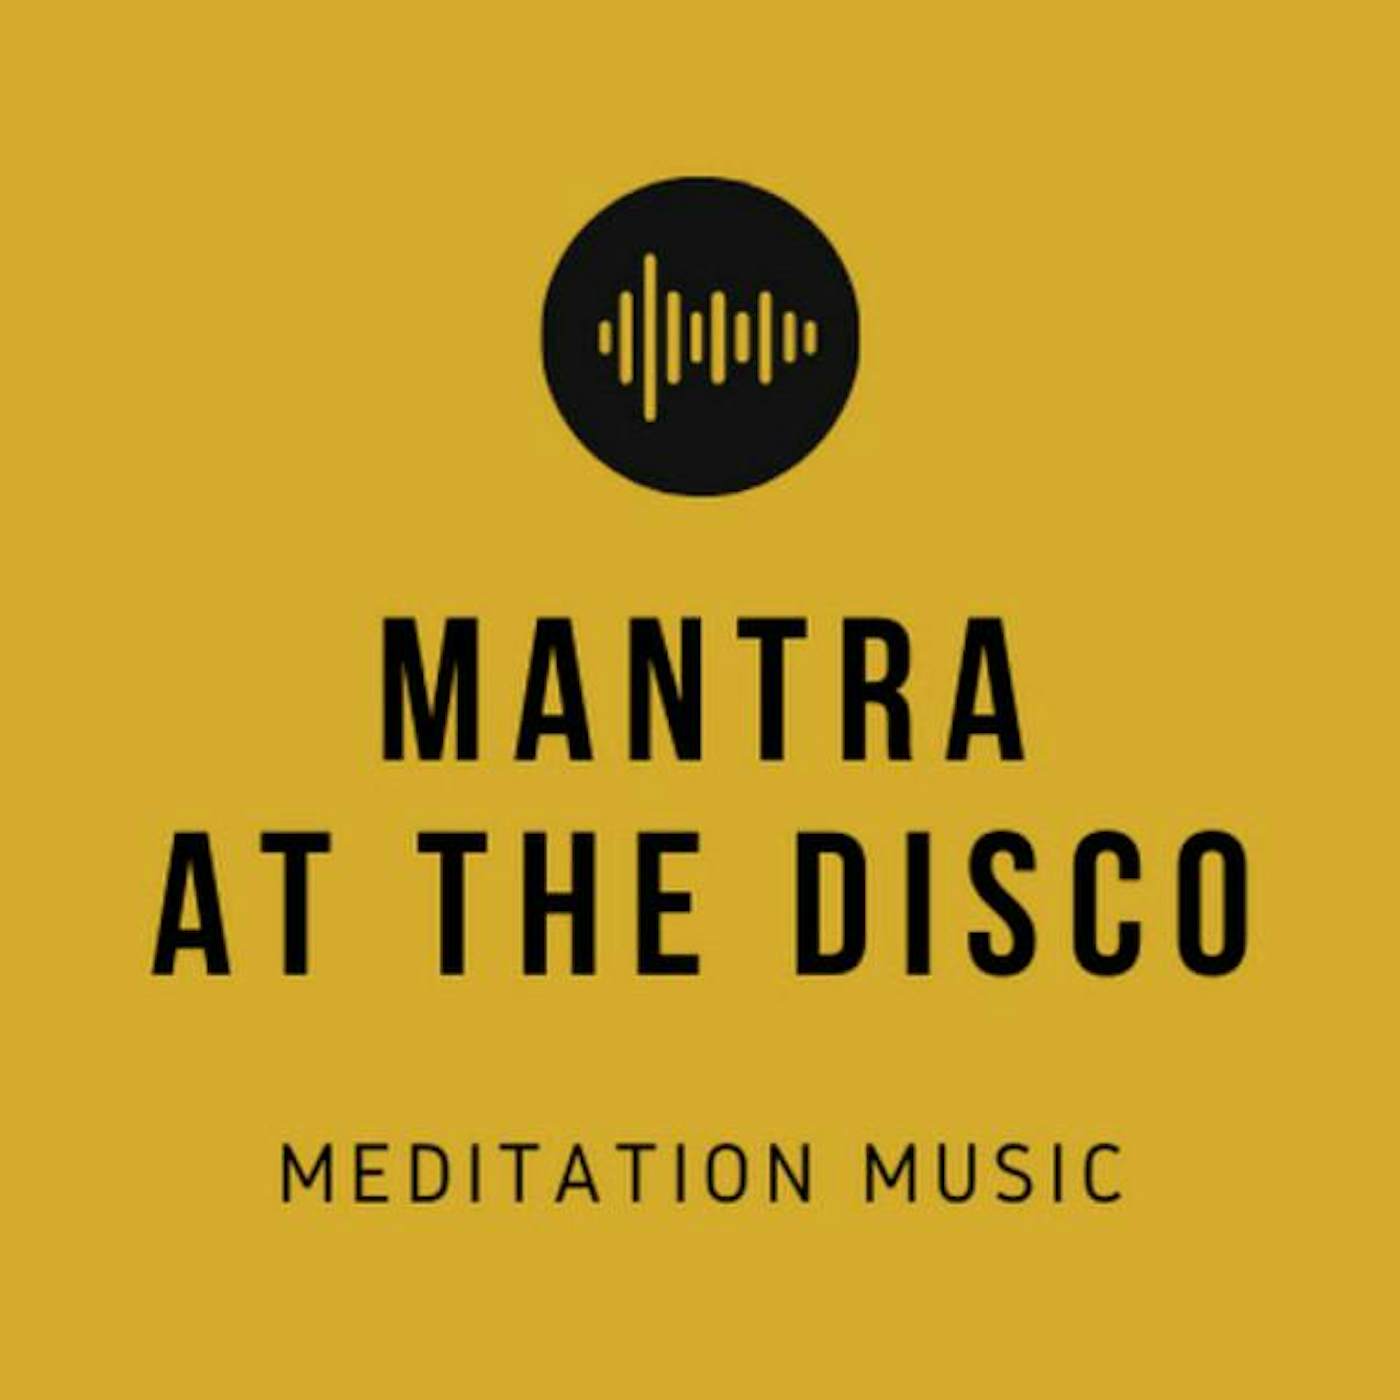 Mantra at the Disco